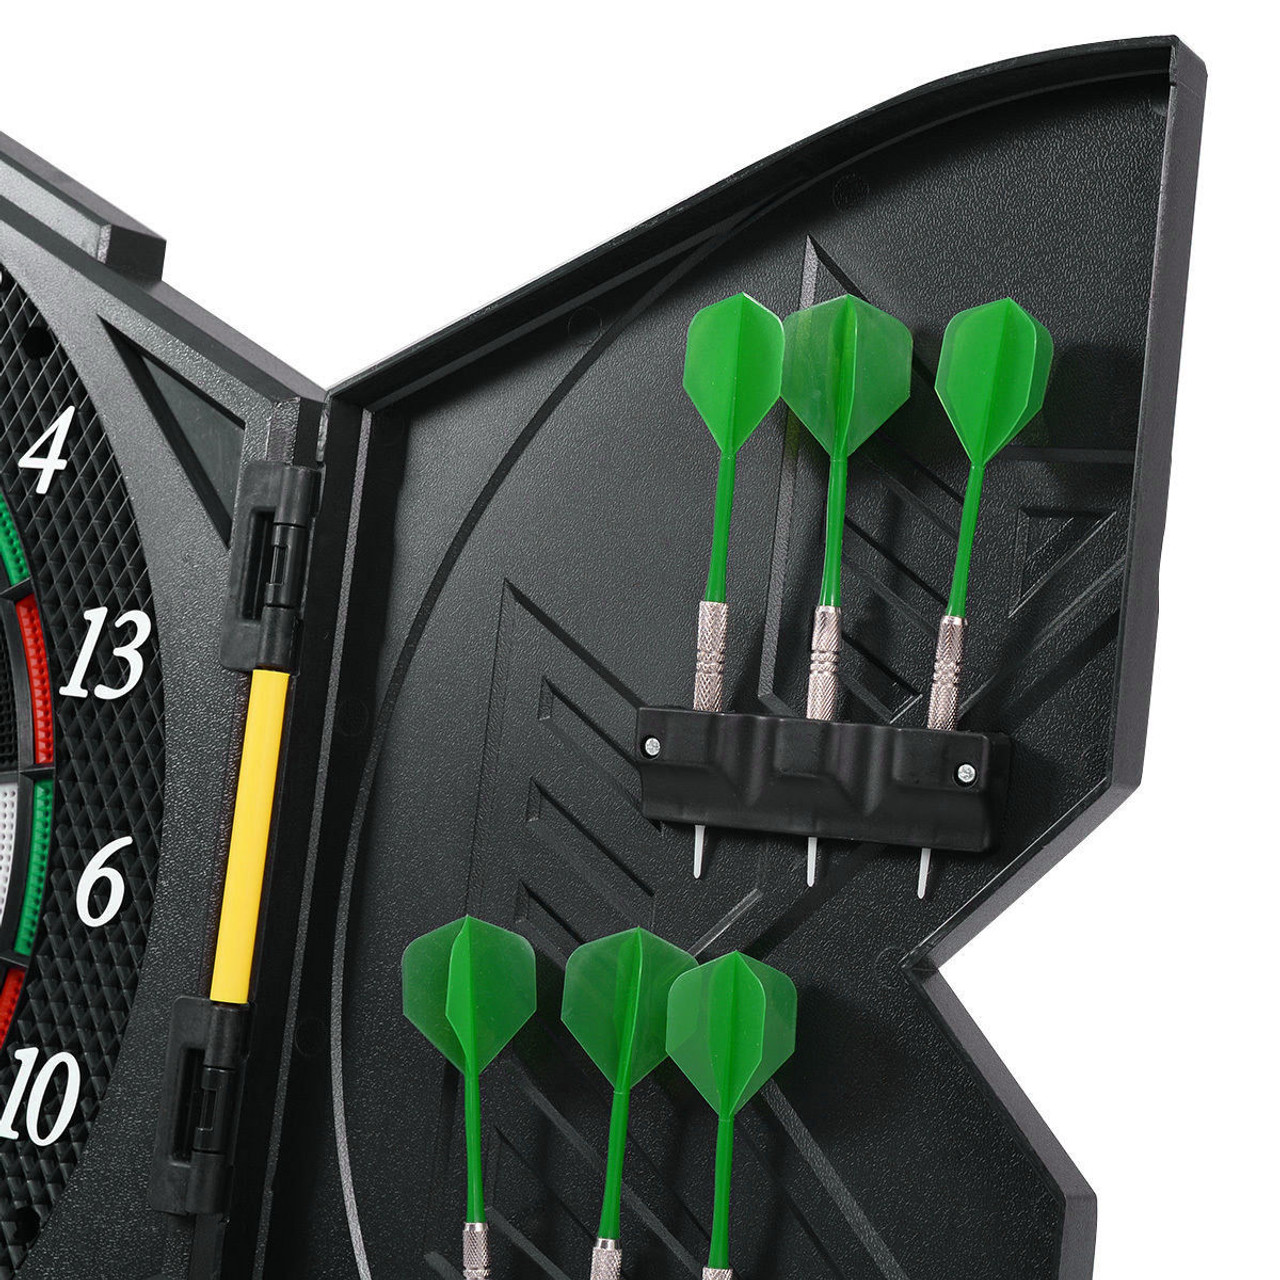 Professional Electronic Dartboard Set with LCD & 12 Darts product image